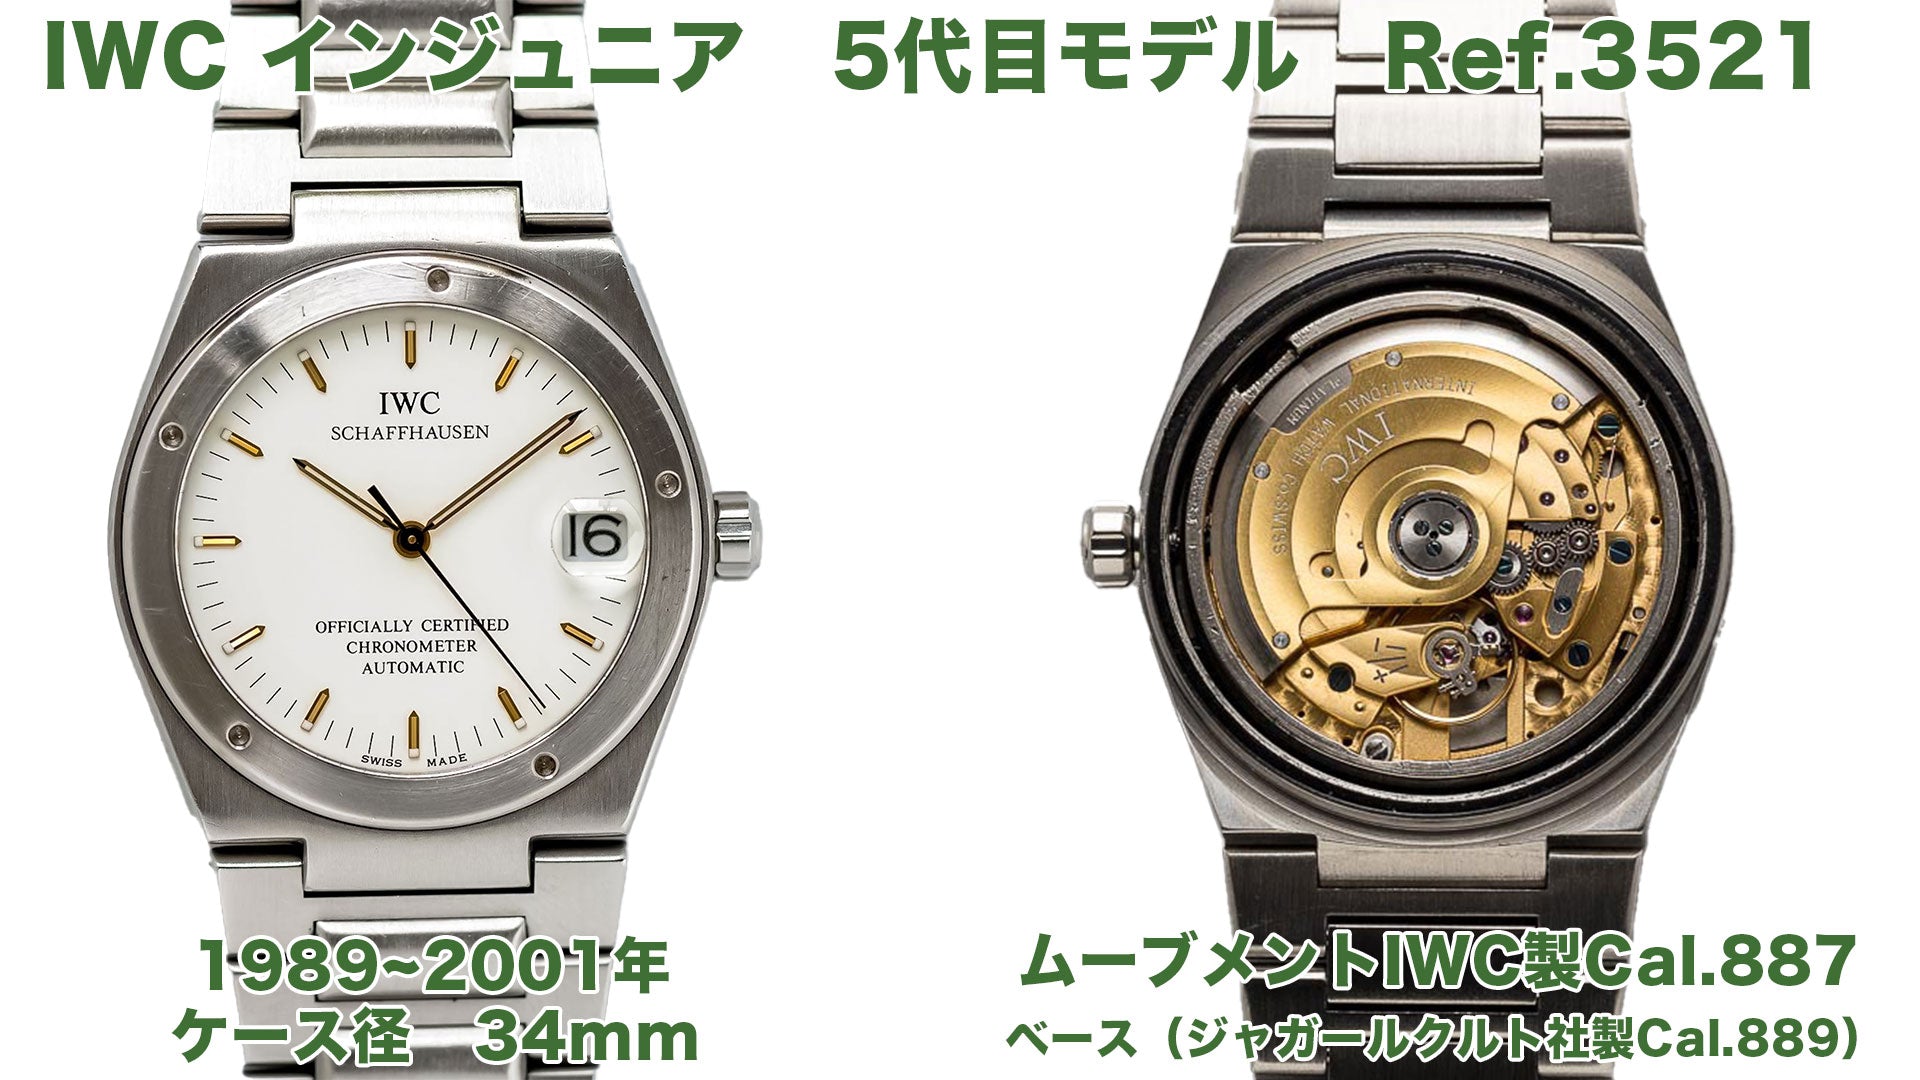 IWC Ingenieur Ref. 3521, Cal. 887 and Cal. 889